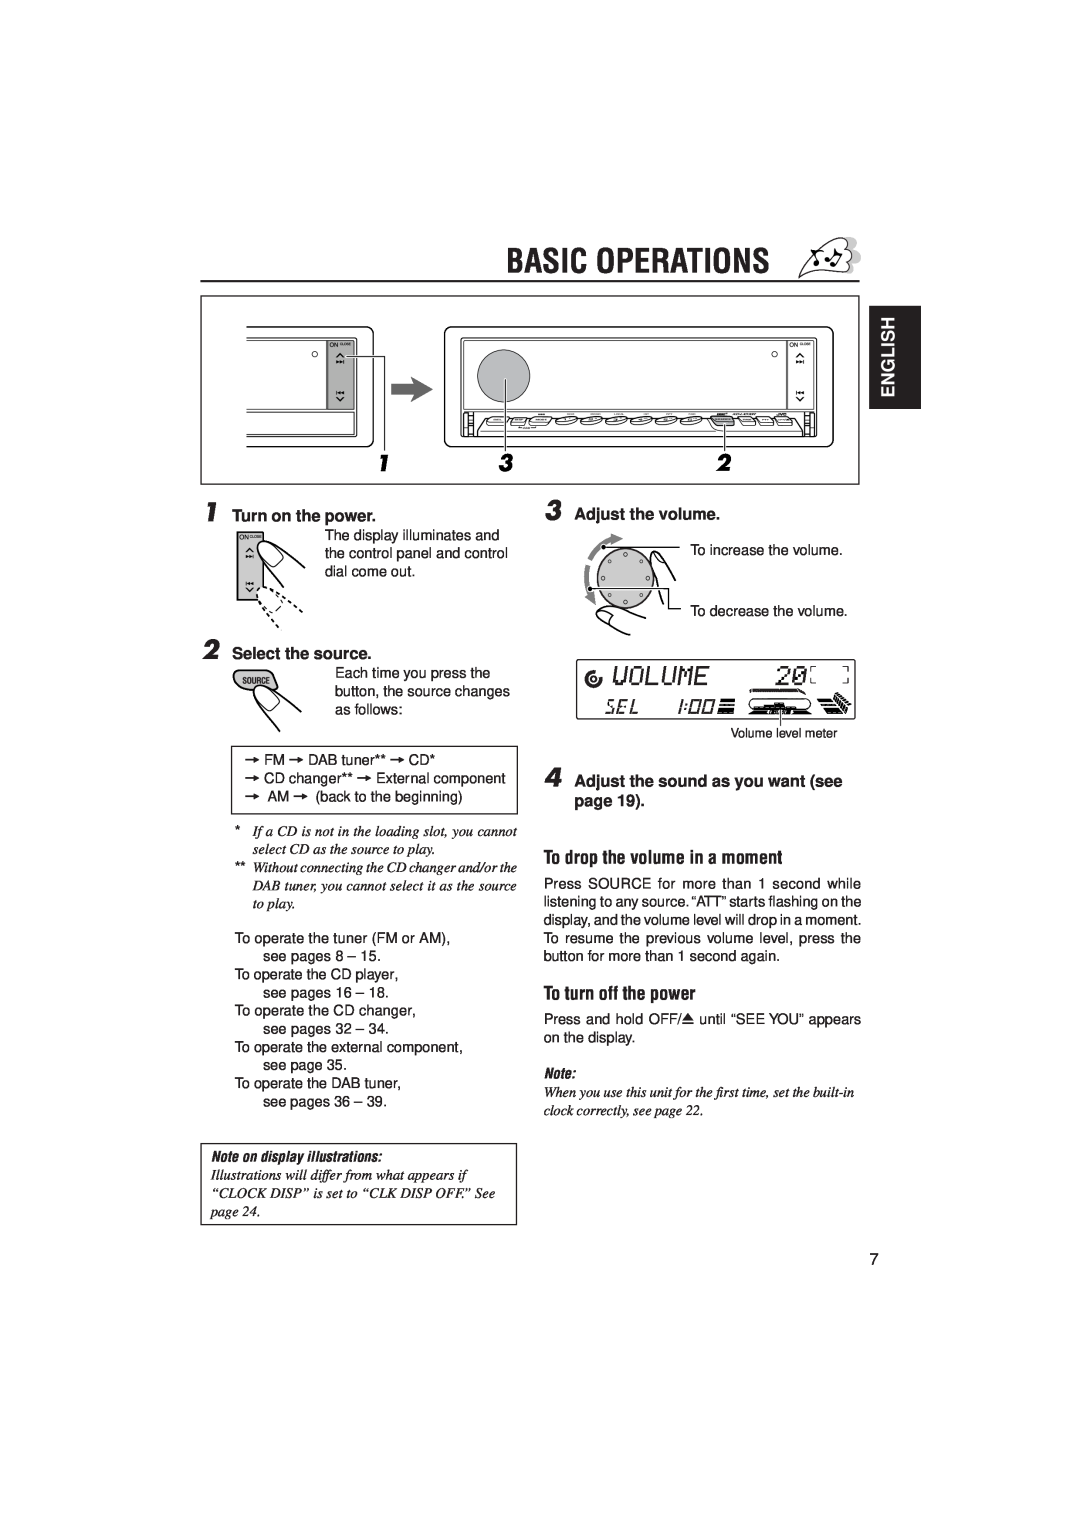 JVC KD-LX330R manual Basic Operations, English, To drop the volume in a moment, To turn off the power, Turn on the power 